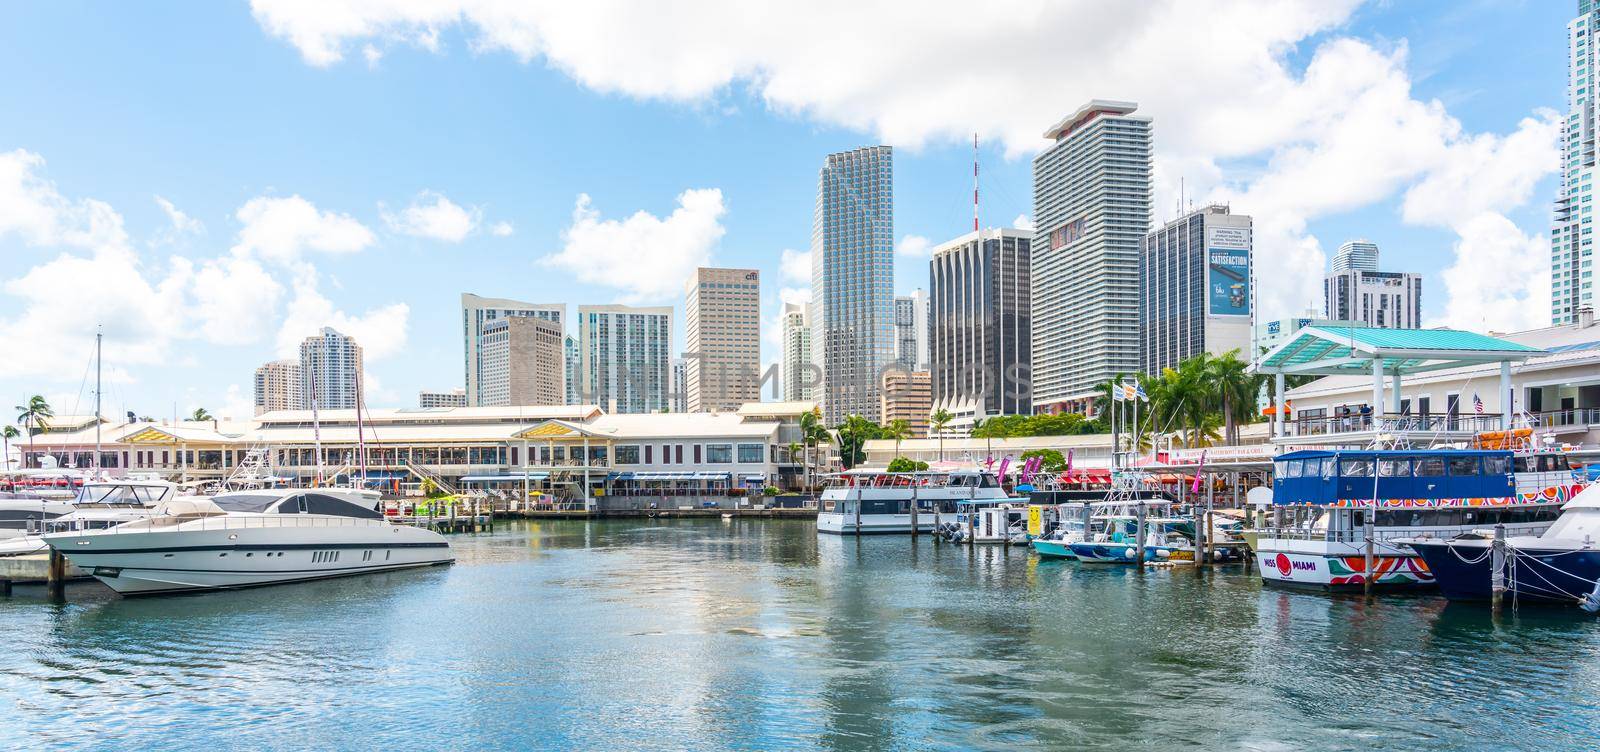 Miami, USA - September 11, 2019: View of the Marina in Miami Bayside with modern buildings and skyline in the background.